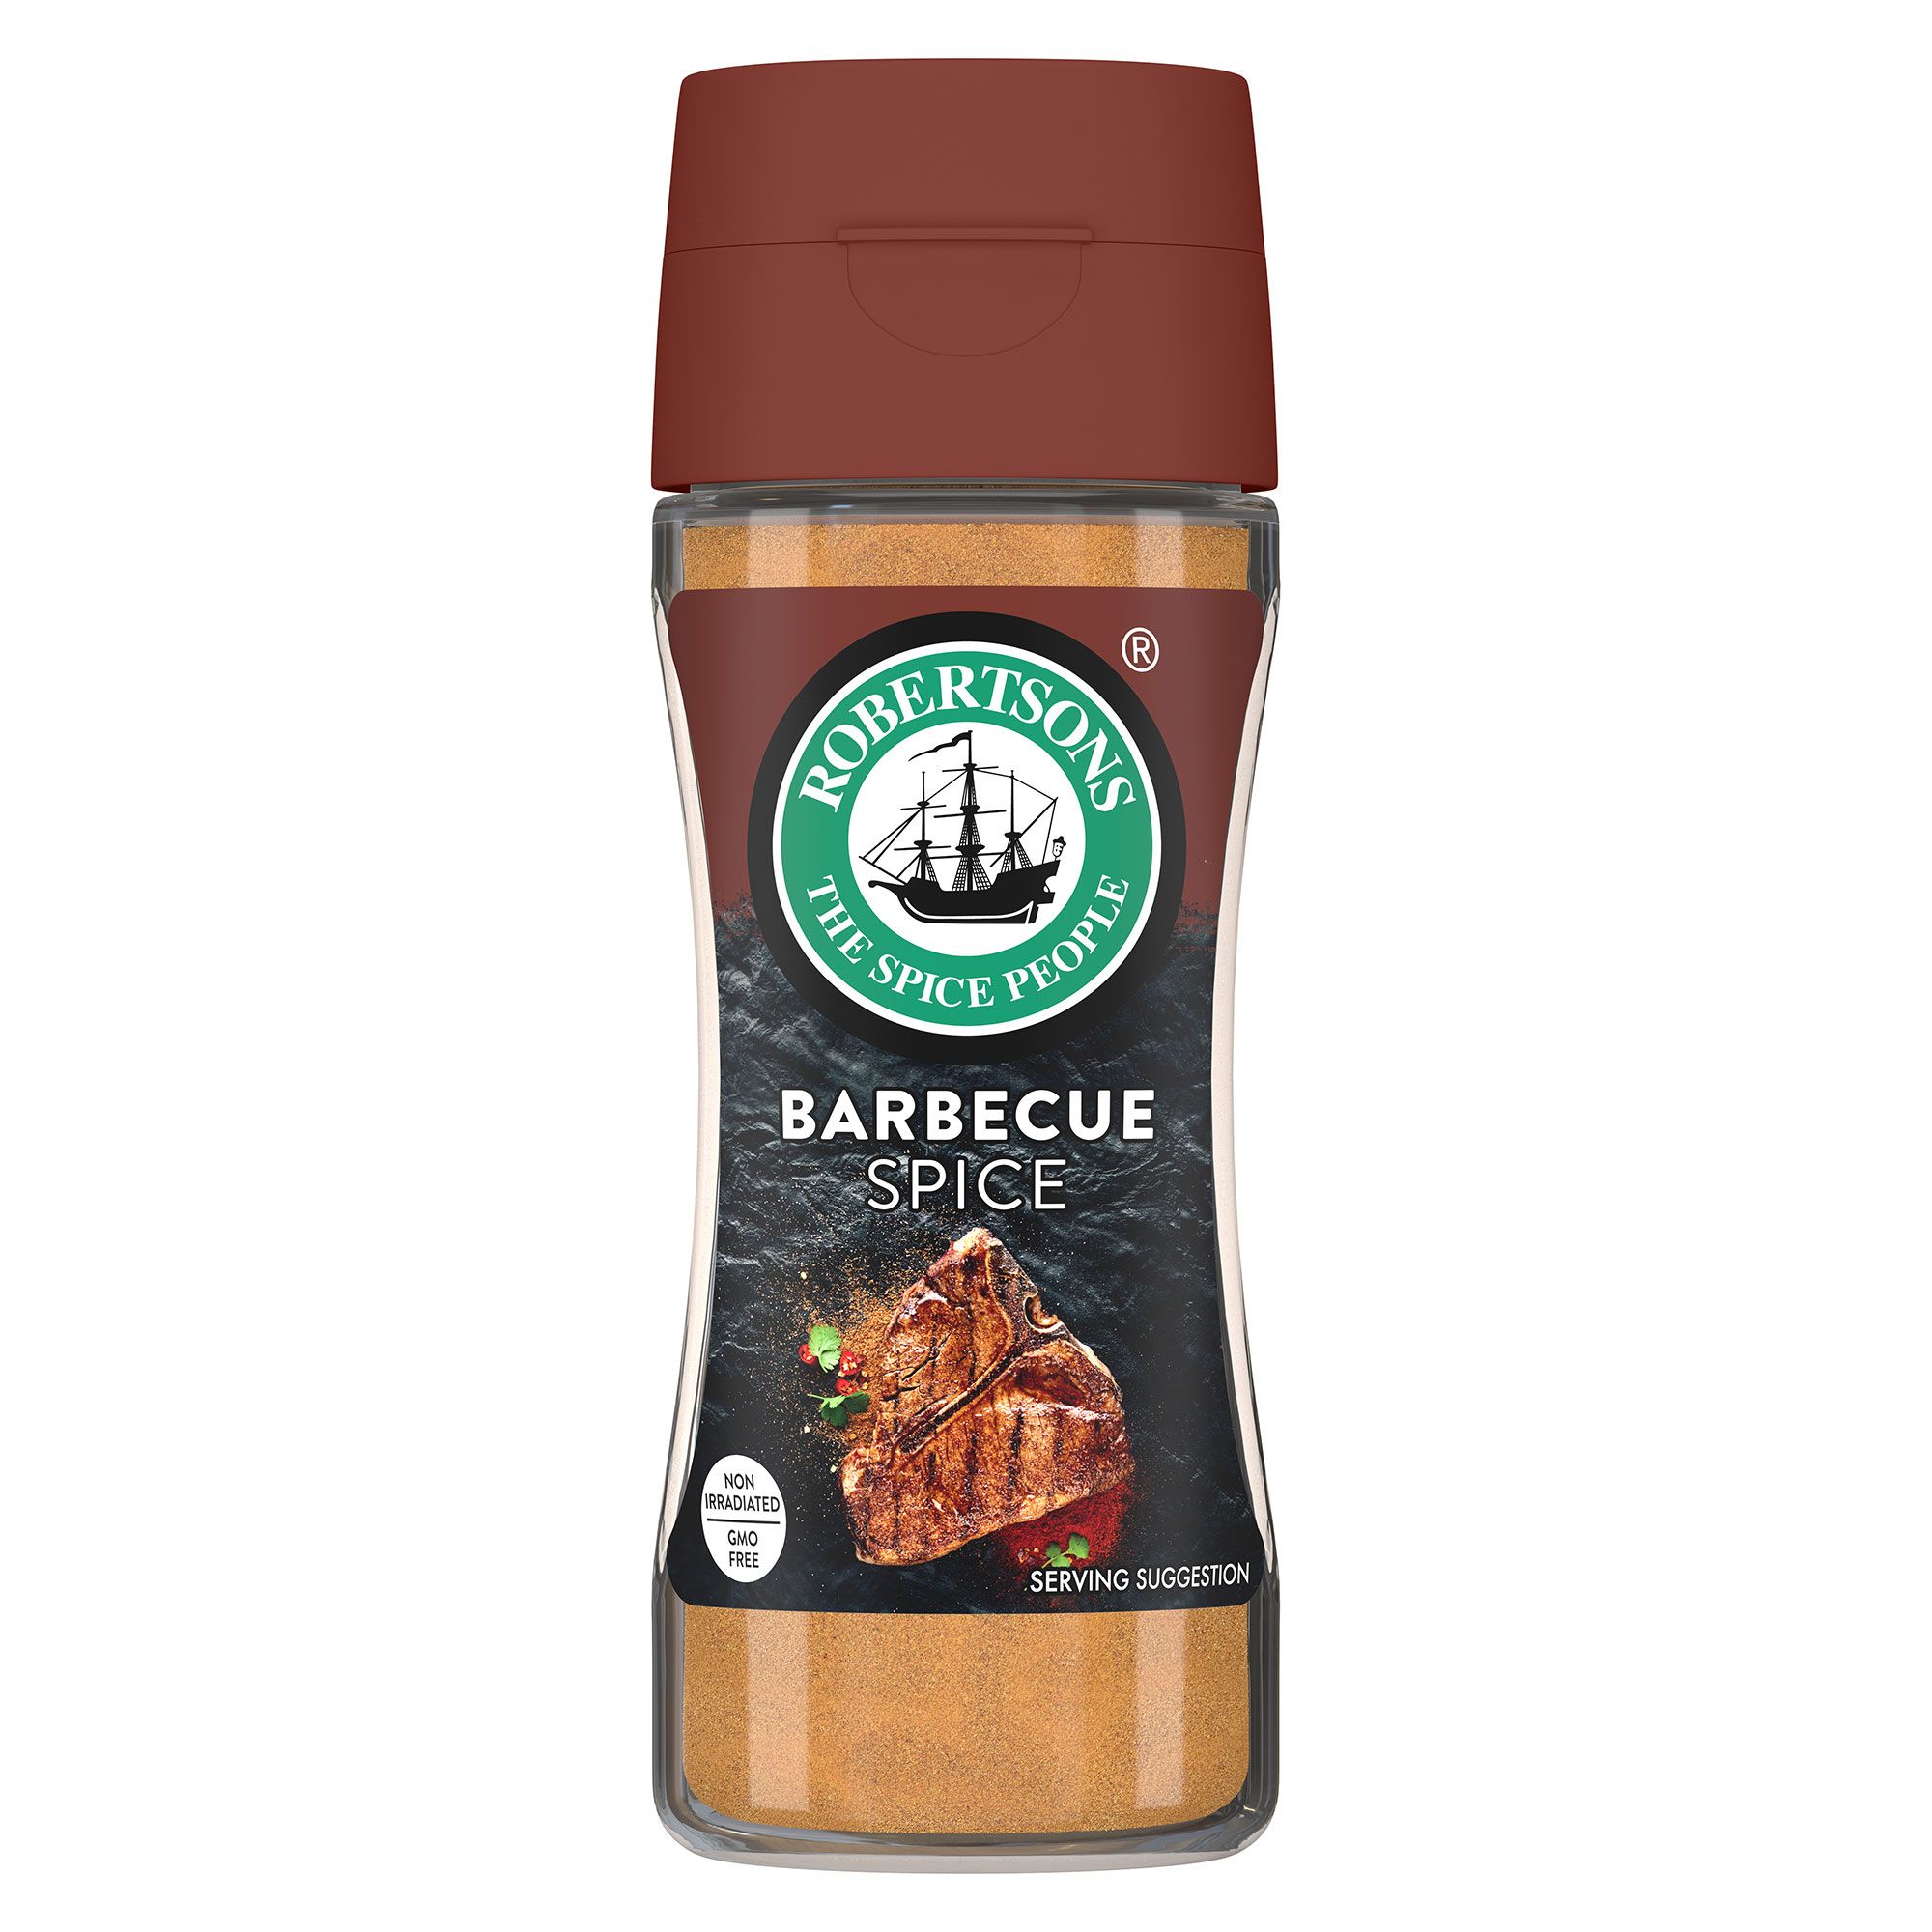 Robertsons Barbecue Spice